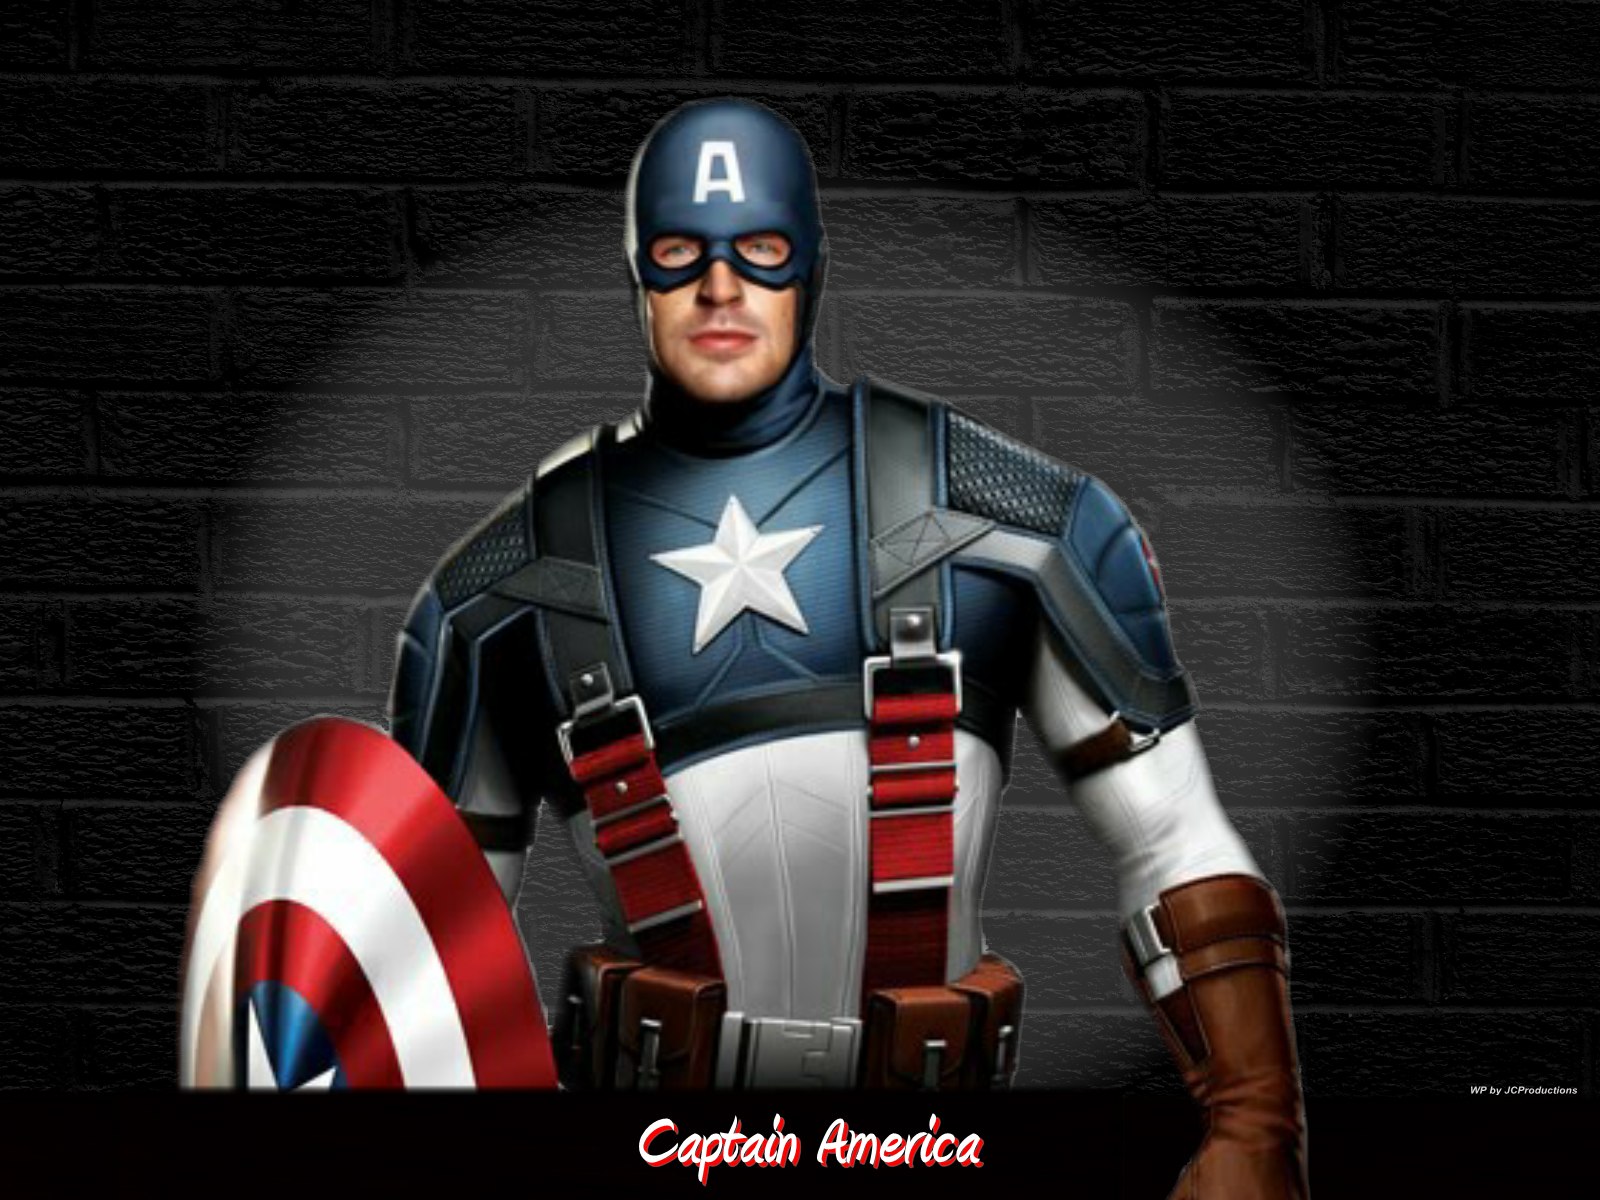 Download HQ captain america, the first avenger, captain america: the first avenger, captain america wallpaper, avenger, america, armed forces Captain America wallpaper / 1600x1200